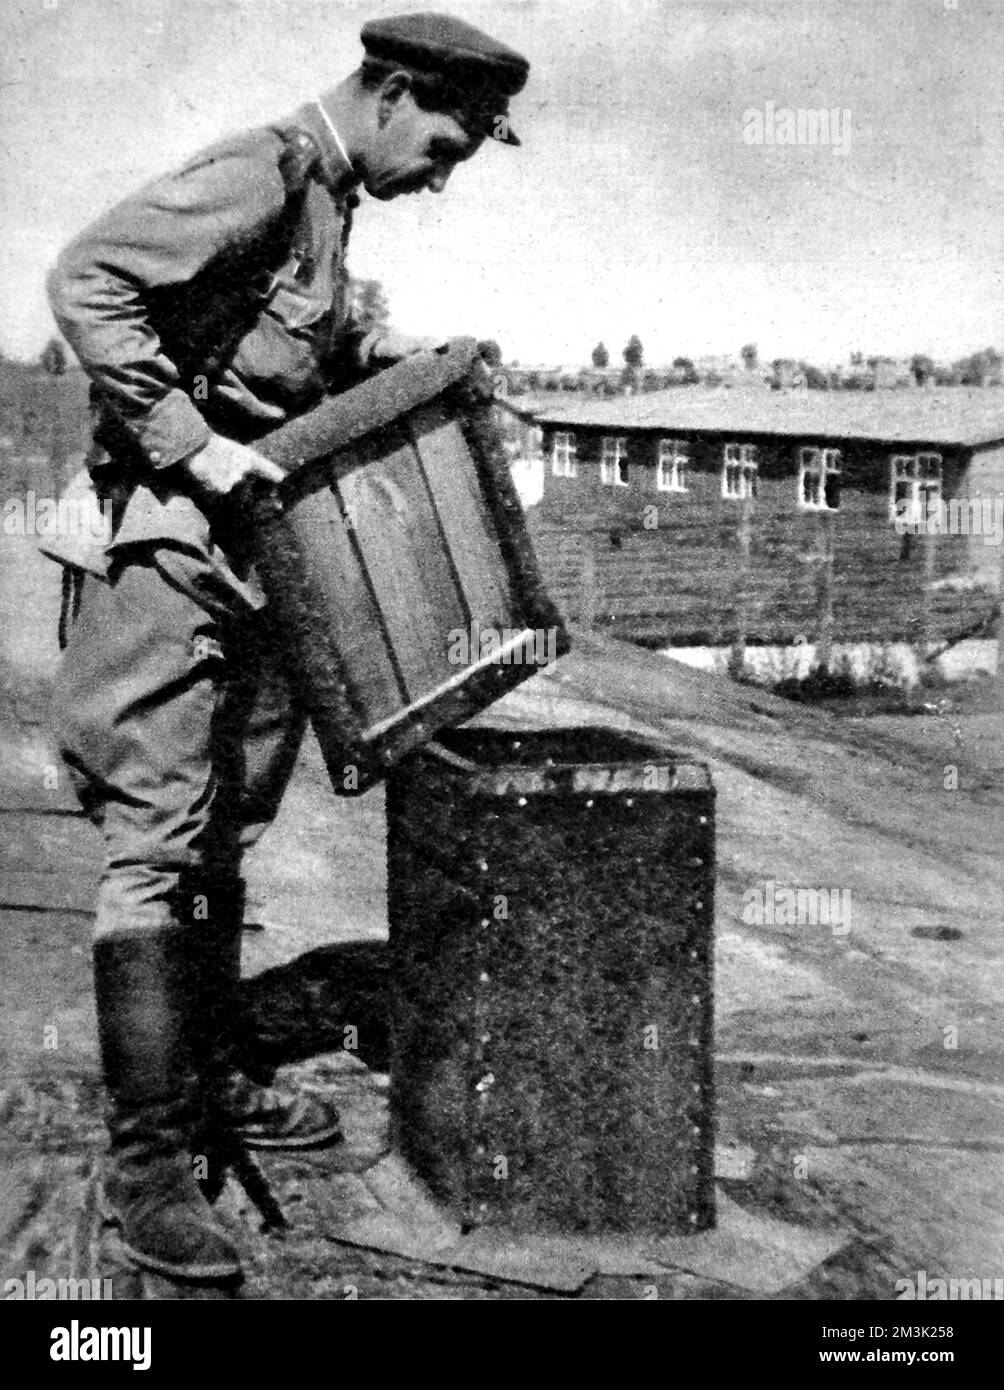 Photograph showing the opening in the roof of the gas chamber at Majdanek Concentration Camp, into which Zyklon-B crystals were poured, 1944.  In this picture a Soviet soldier can be seen holding the cover of the opening.    Majdanek, near Lublin in Poland, was run as a concentration camp by the Waffen-SS between 1941 and 1944.  Although the Germans attempted to destroy the evidence of their atrocities at the camp, there was too much to hide and the Russian army captured much of the camp intact.     Date: 1944 Stock Photo